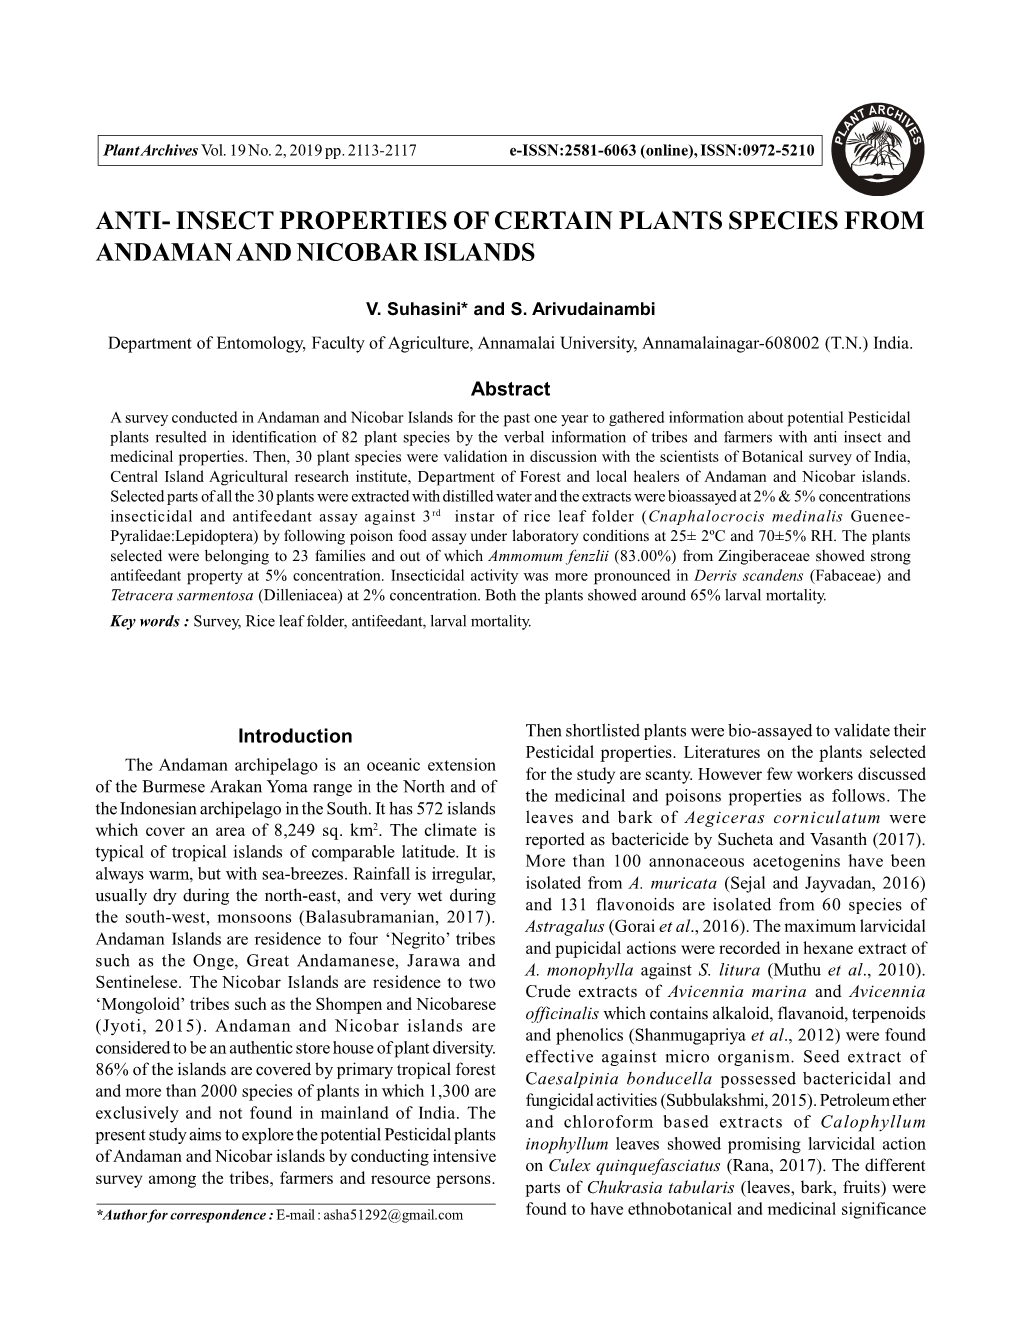 Insect Properties of Certain Plants Species from Andaman and Nicobar Islands